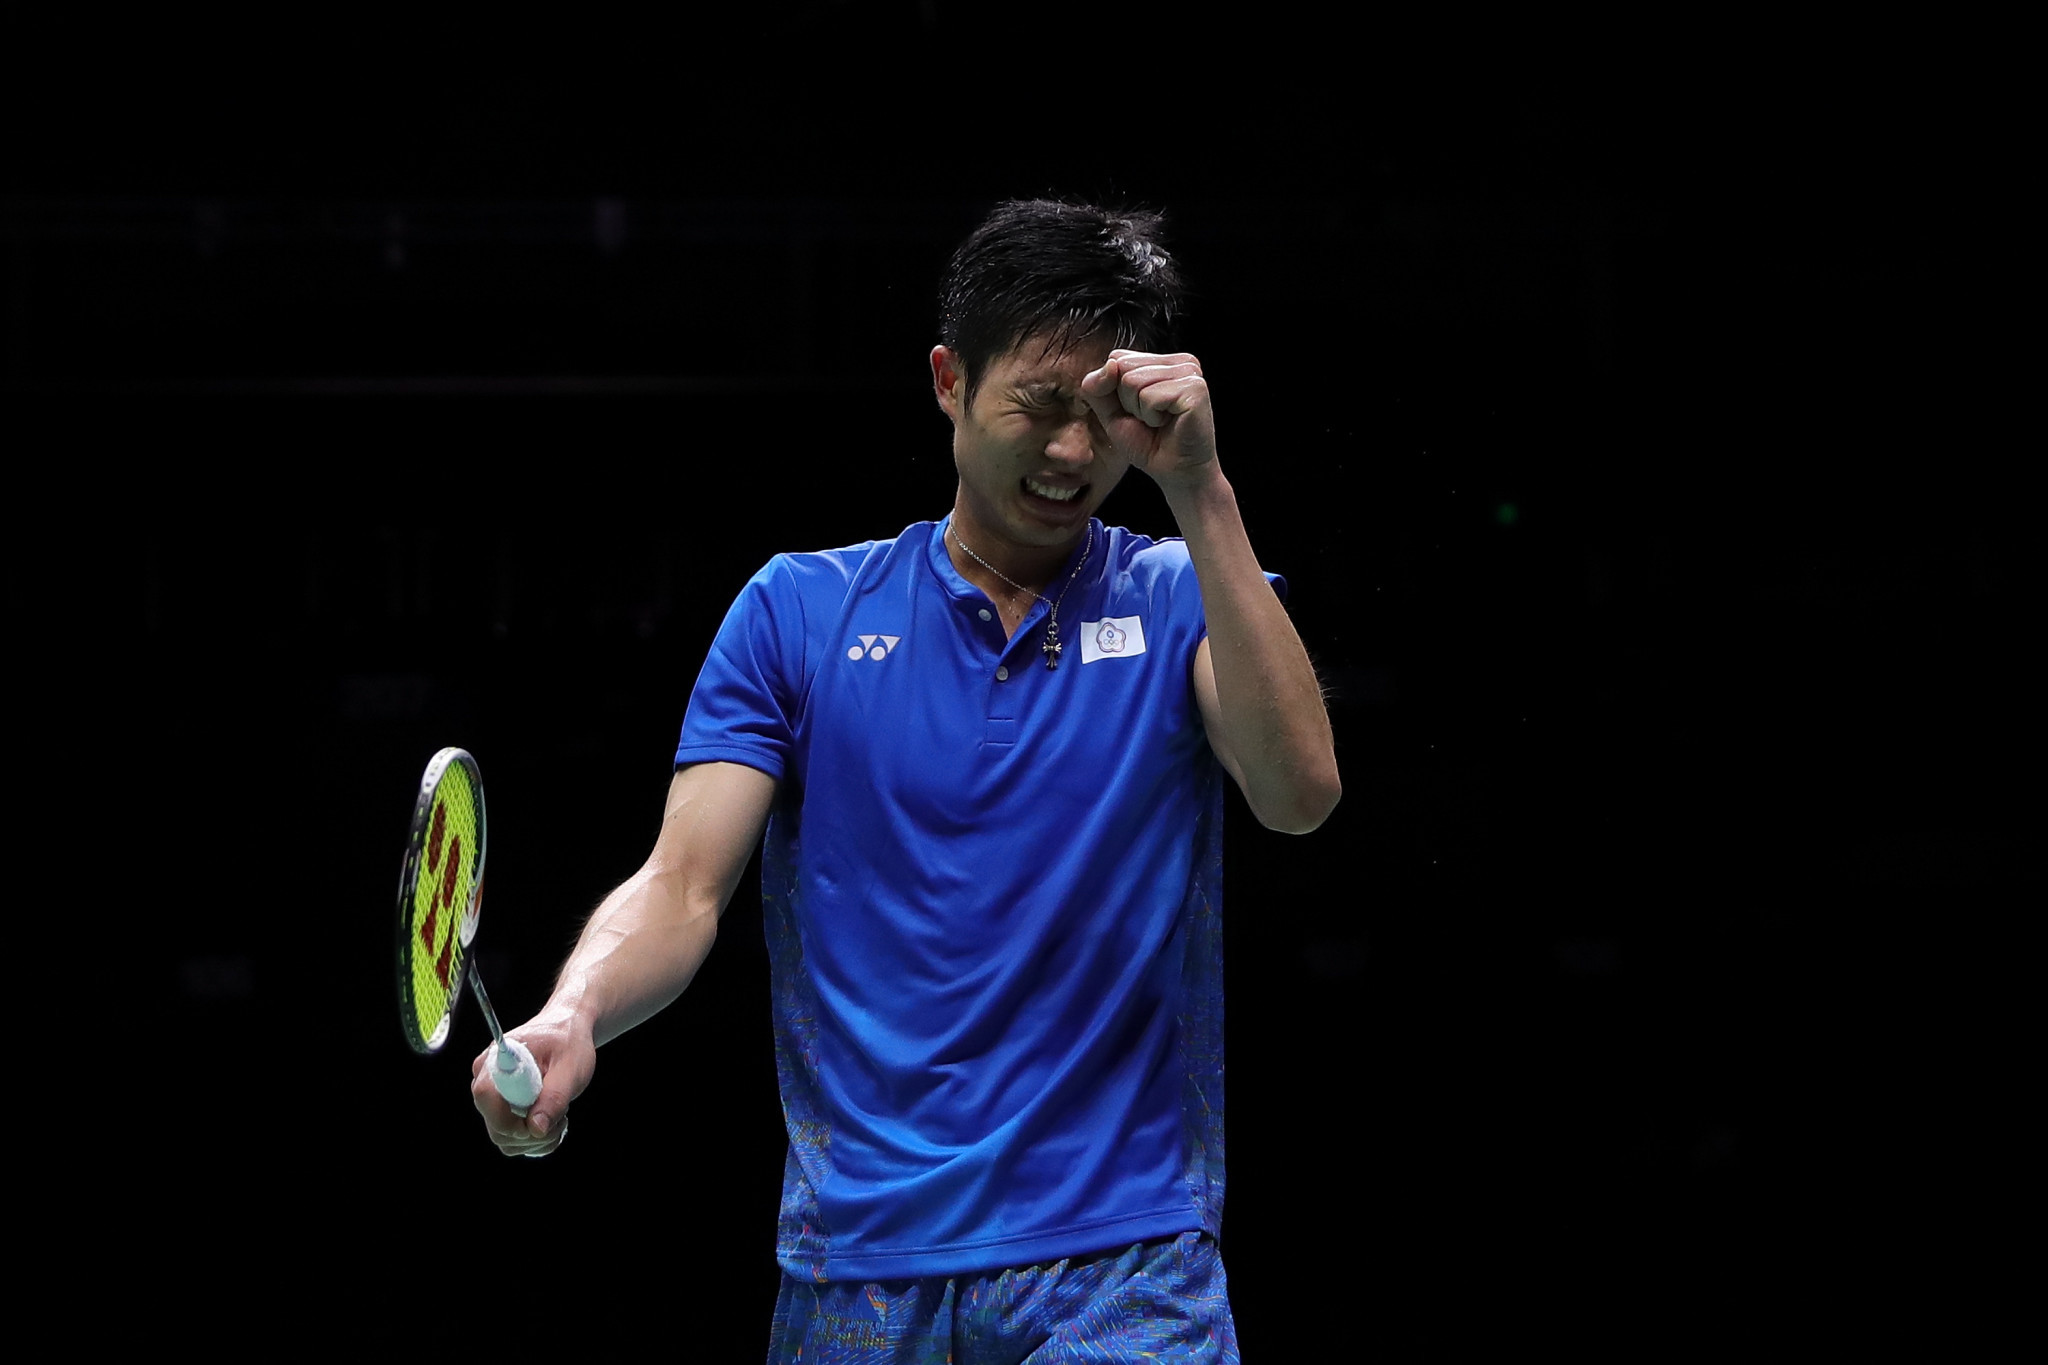 Chinese Taipei's Chou Tien-chen was the top seed going into the competition but has been knocked out in the semi-final of his home tournament ©Getty Images